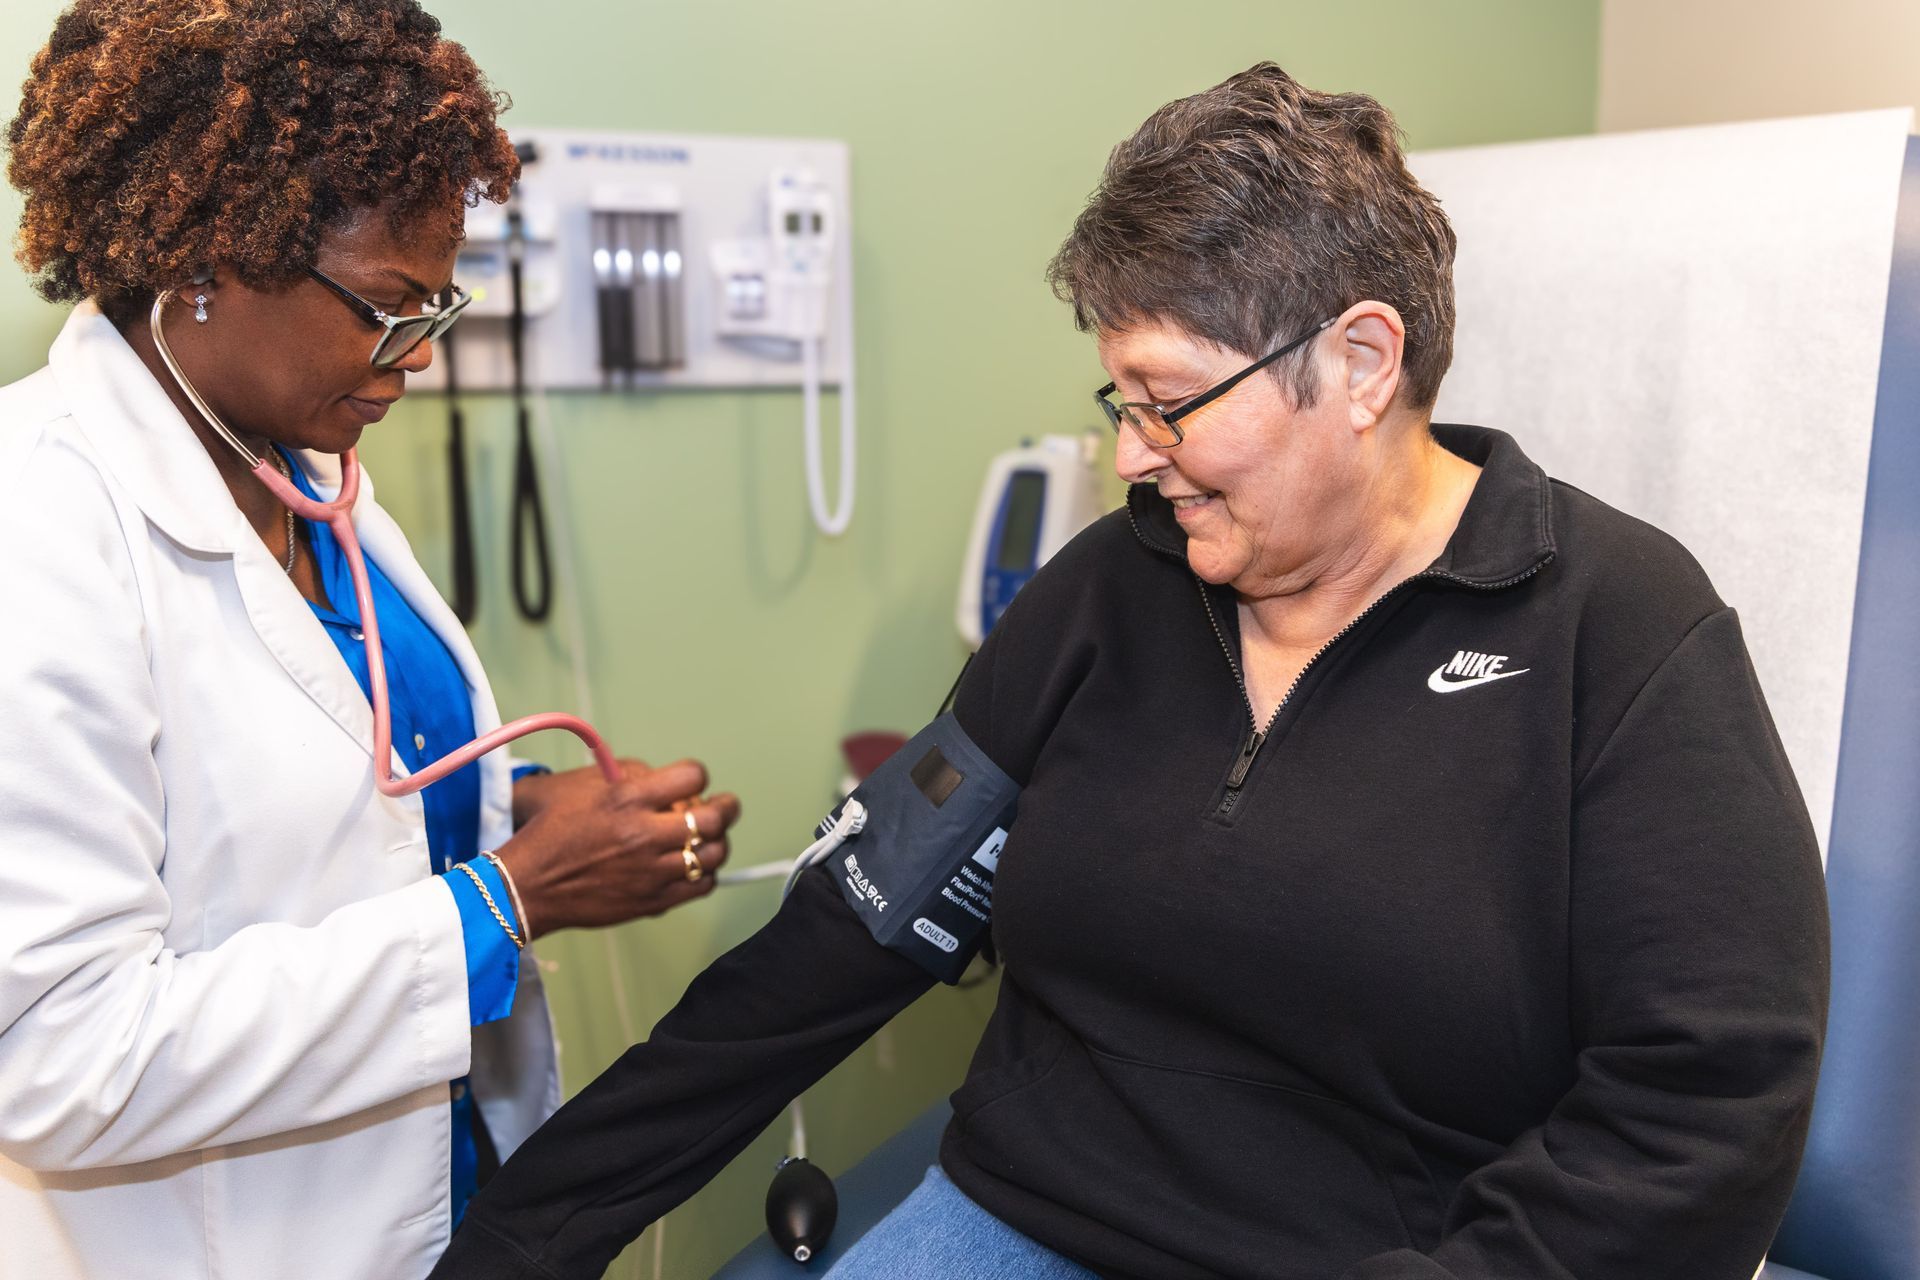 An image of a female doctor taking the blood pressure of a female patient